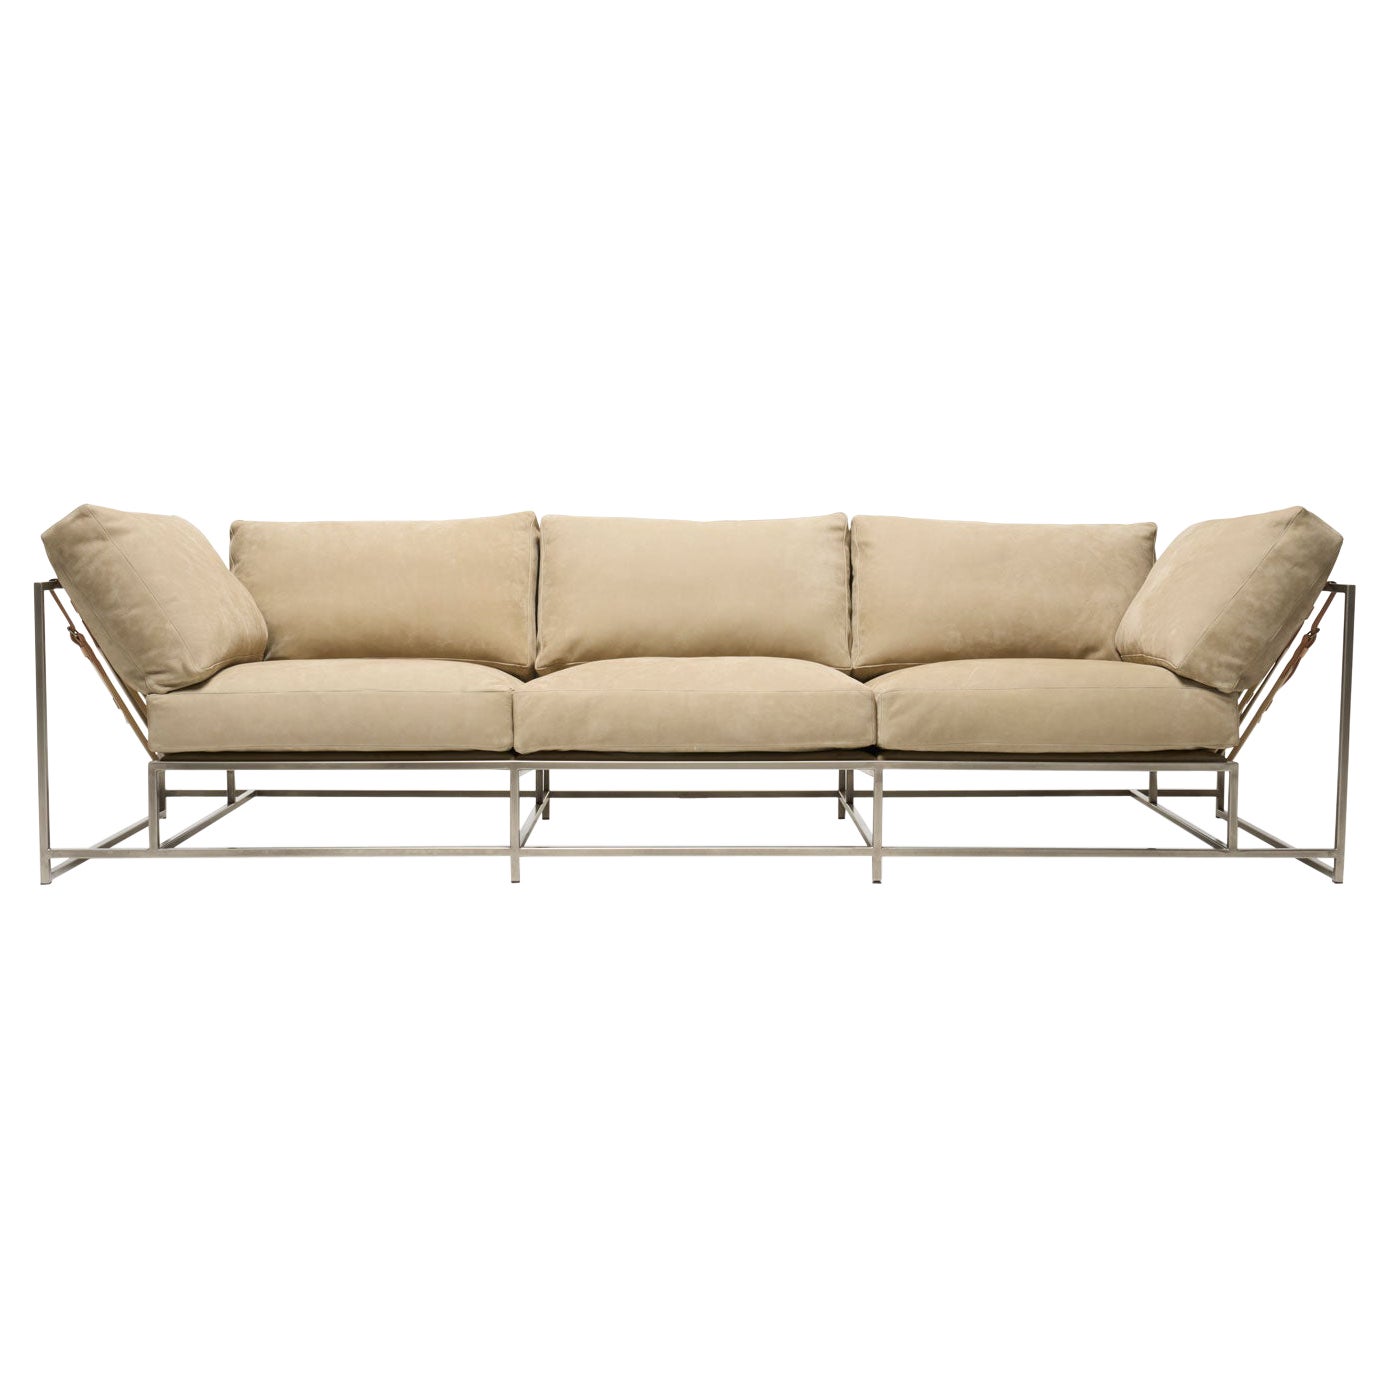 Natural Nubuck Leather and Antique Nickel Sofa For Sale